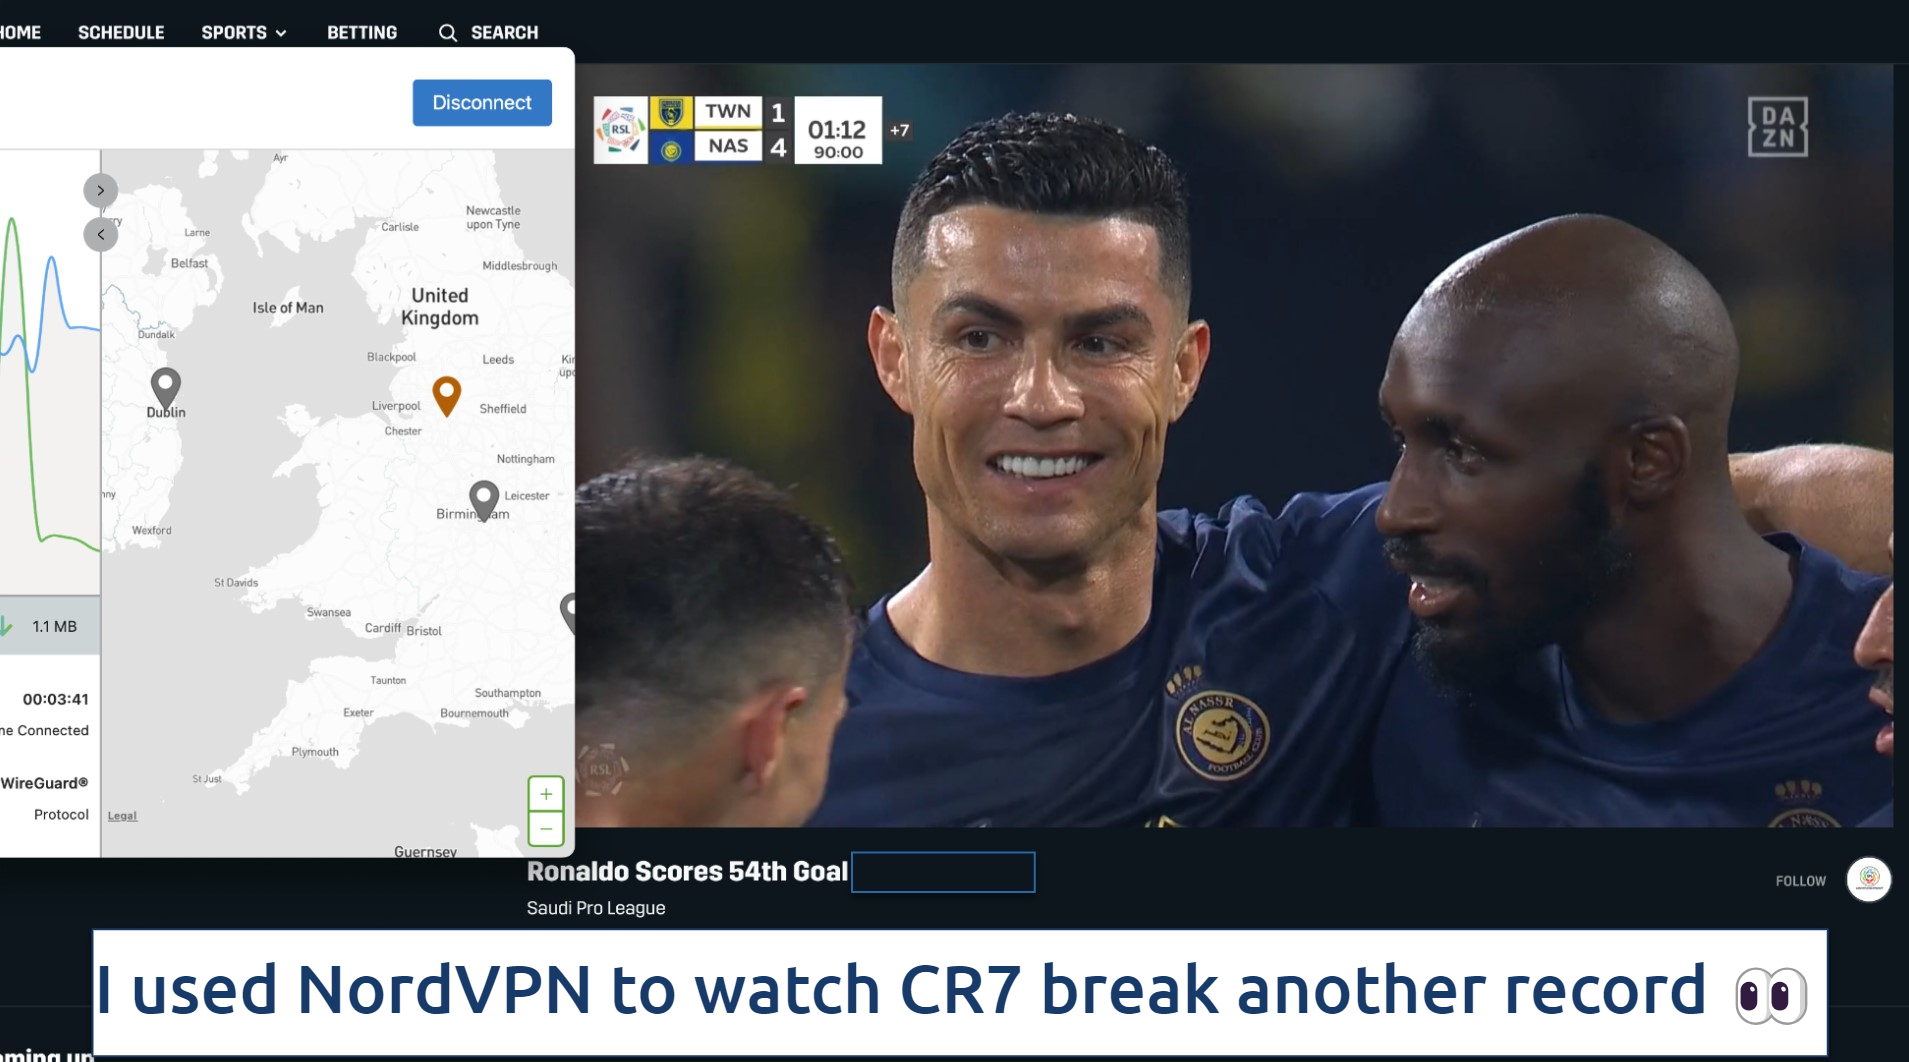 Screenshot of NordVPN connected to a UK server while streaming a Saudi Pro League soccer game with Cristiano Ronaldo on DAZN